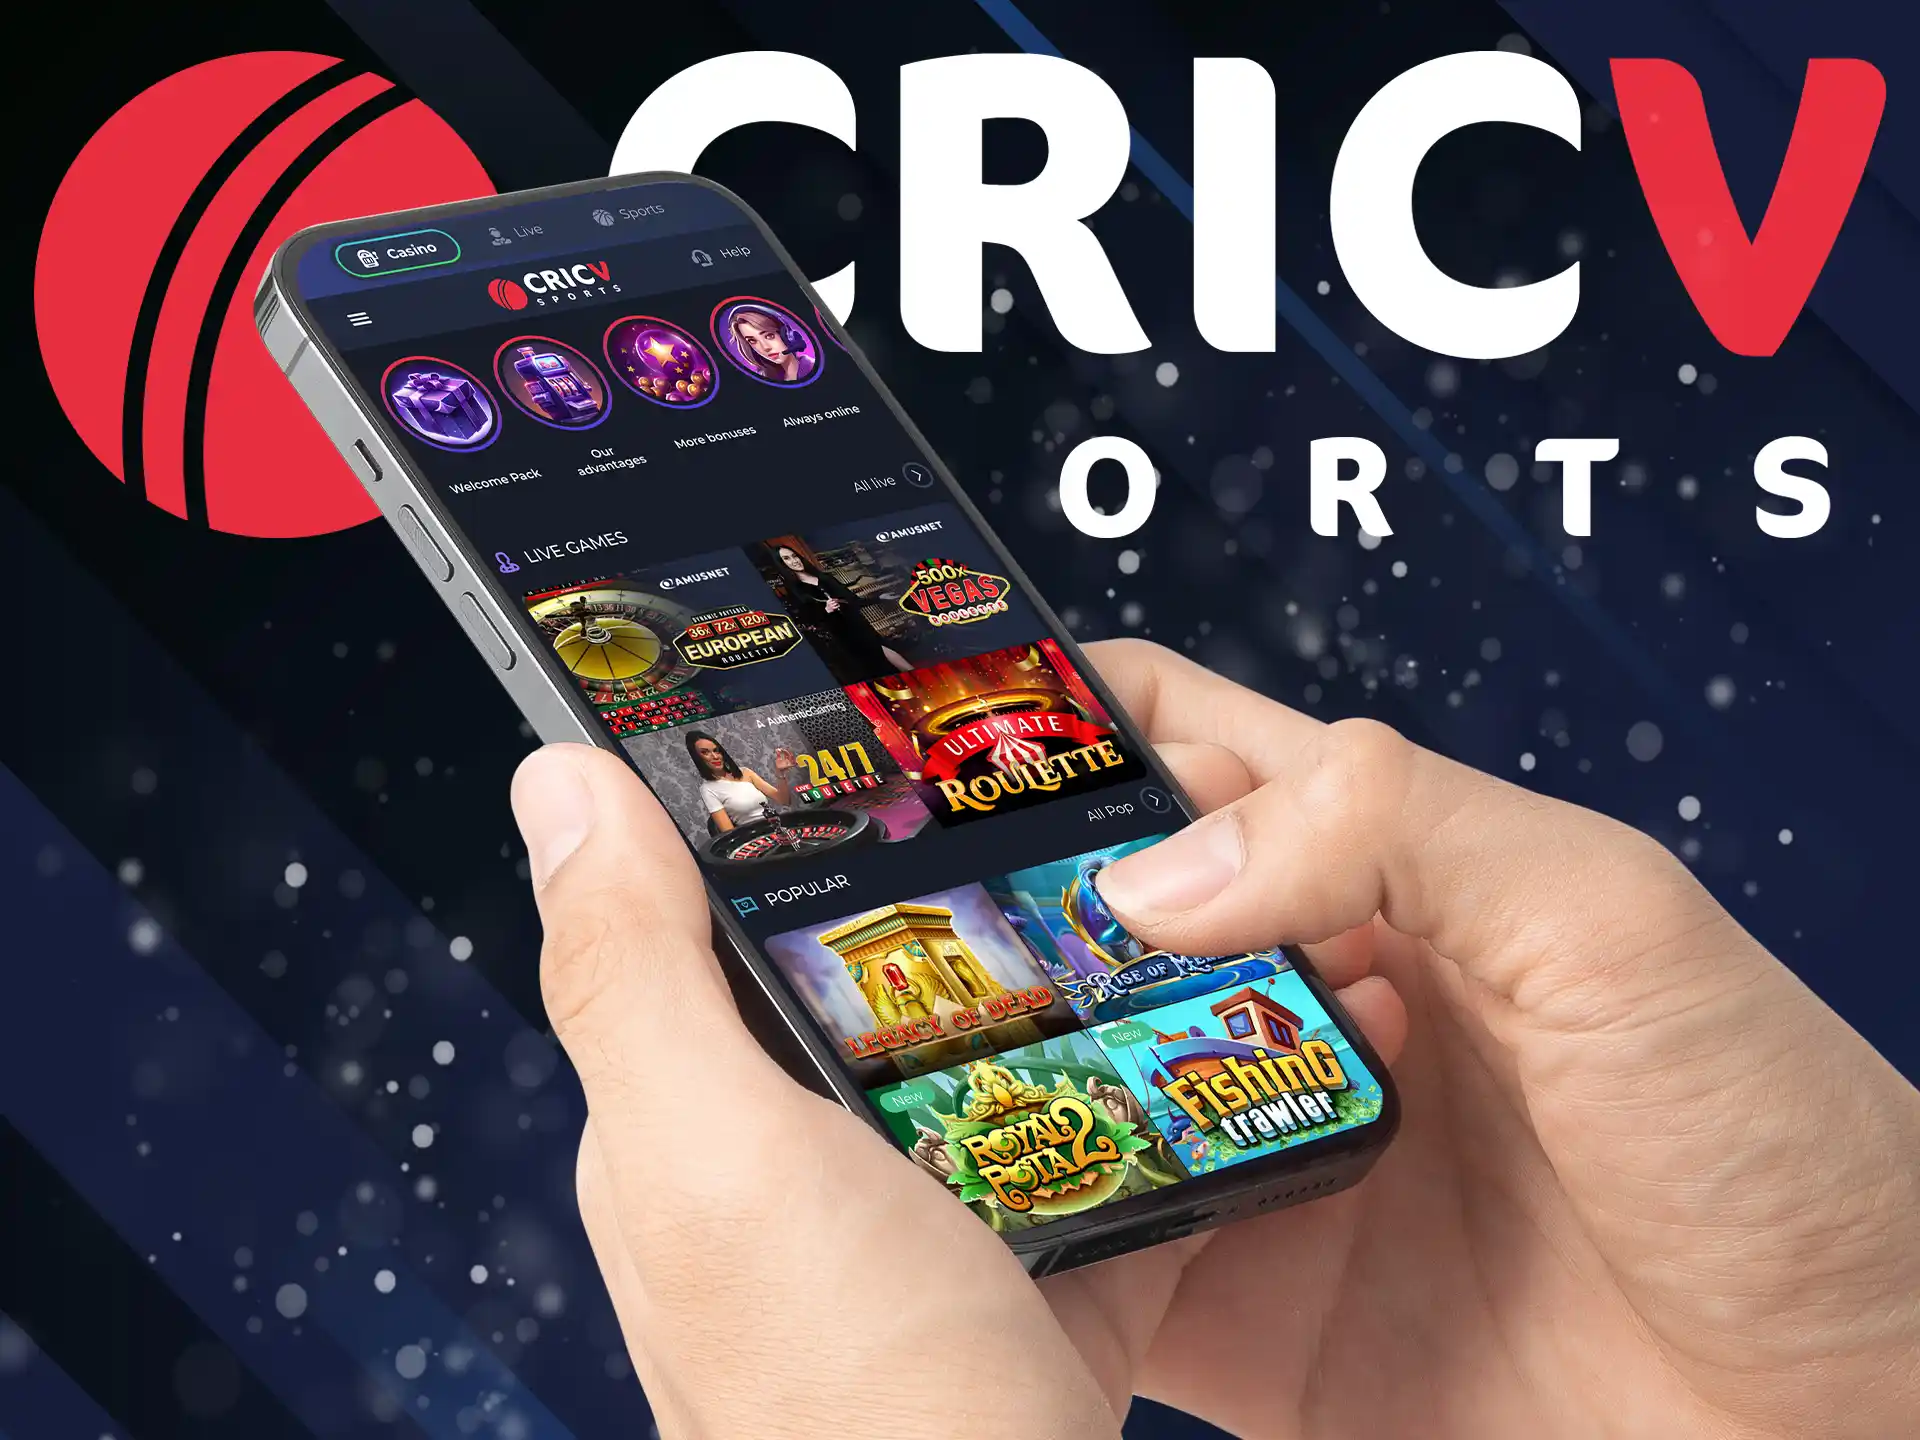 The CricV app is the choice of most Indian users, due to its high degree of protection of all data and many benefits.